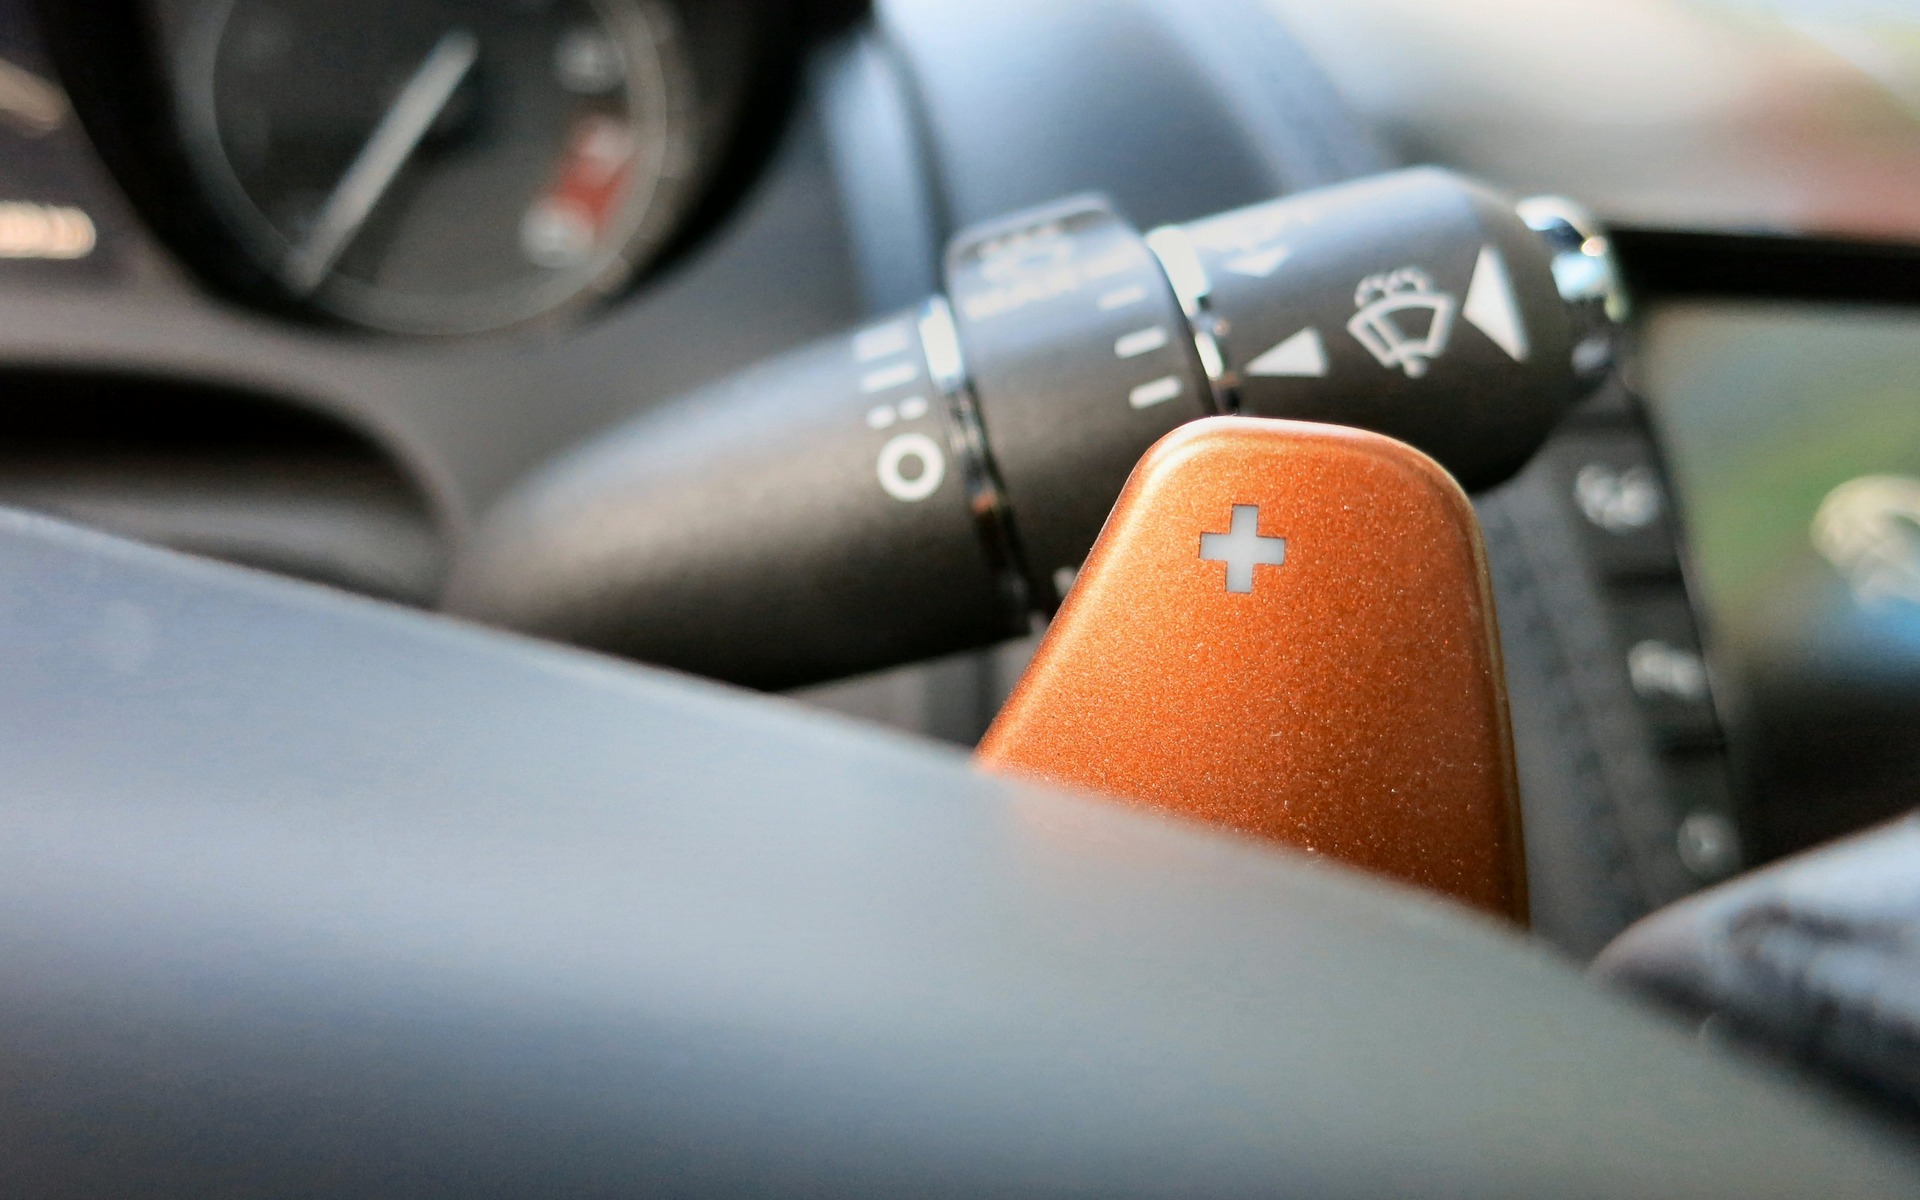 The paddle shifters are crisp and precise.